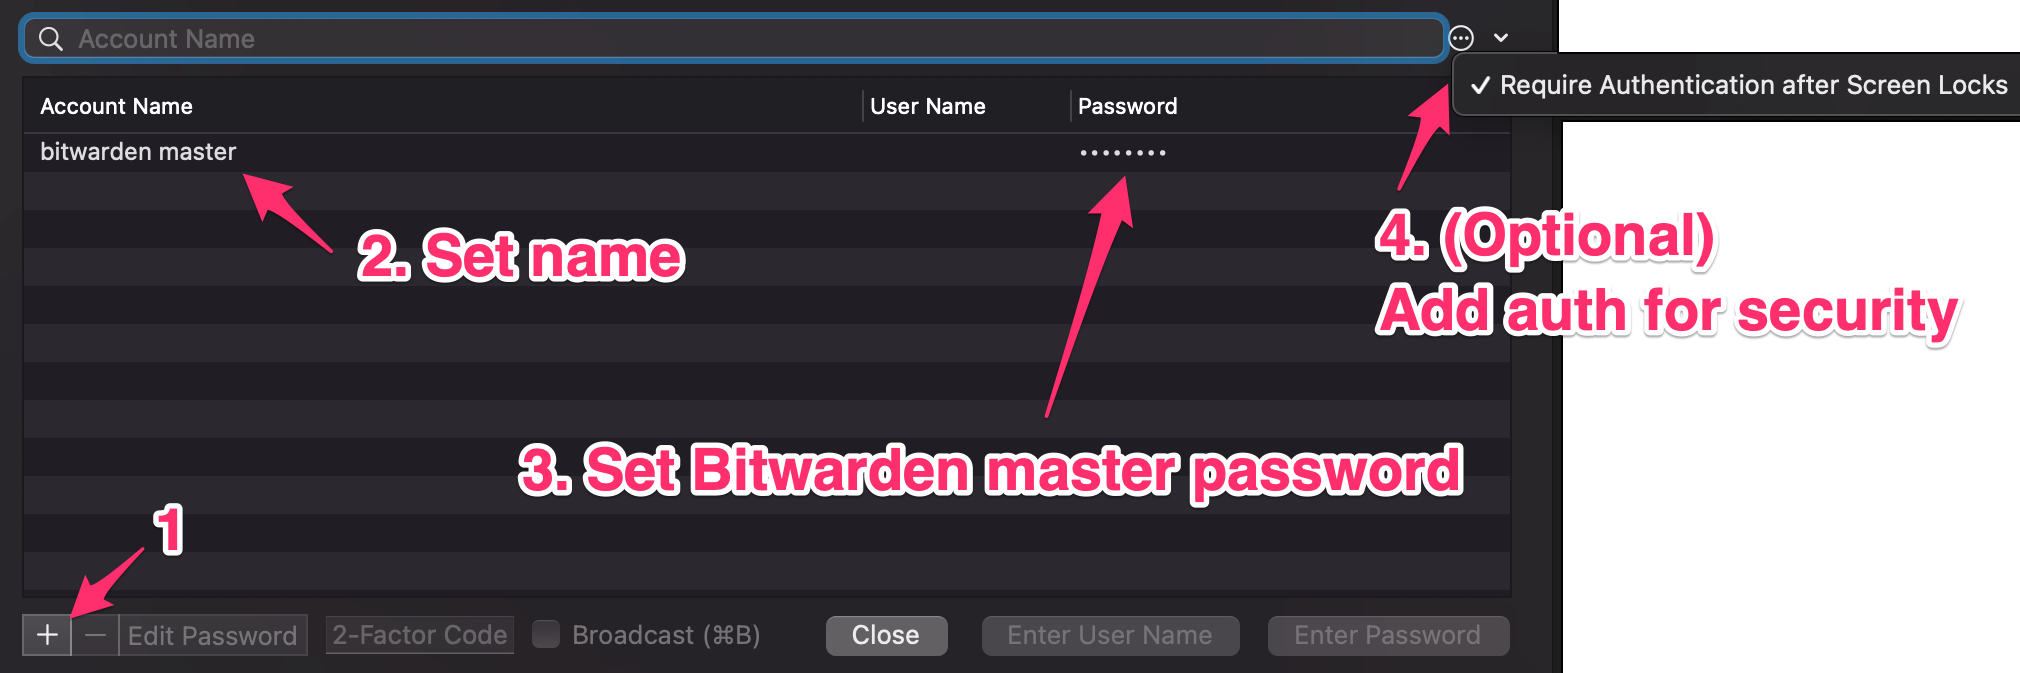 iTerm-password-manager-example